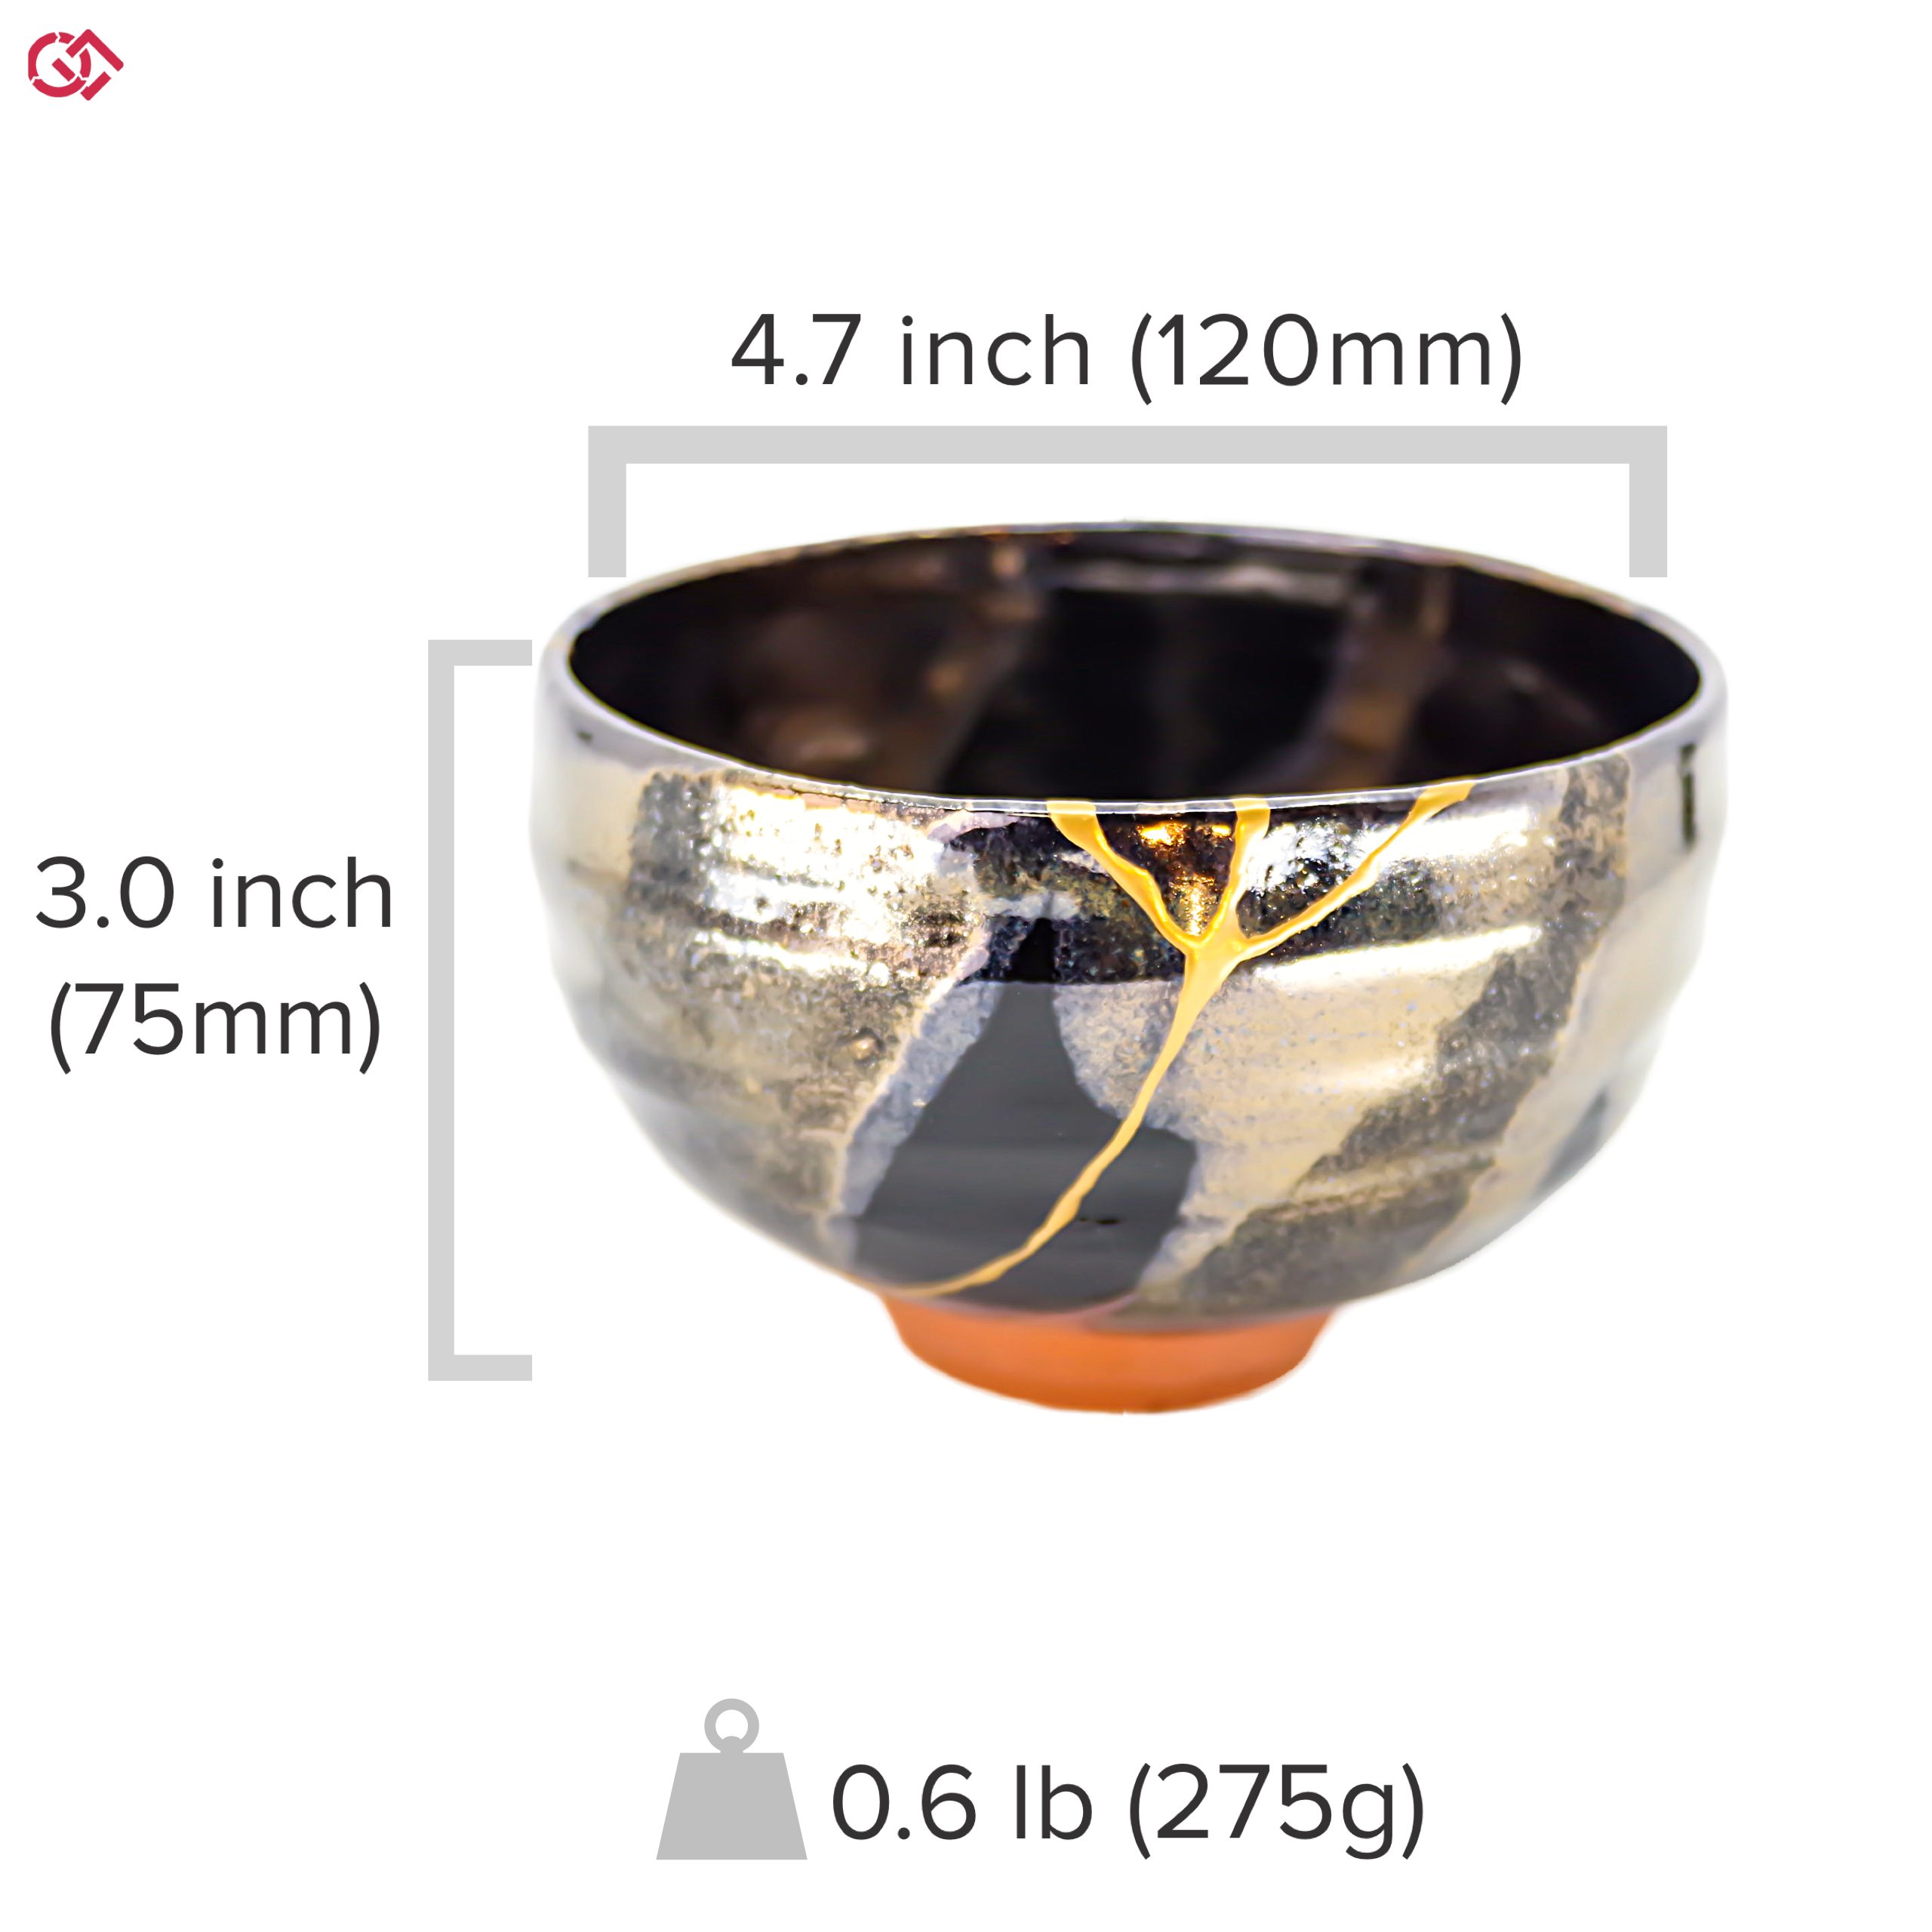 Authentic Kintsugi pottery with sizes indicated